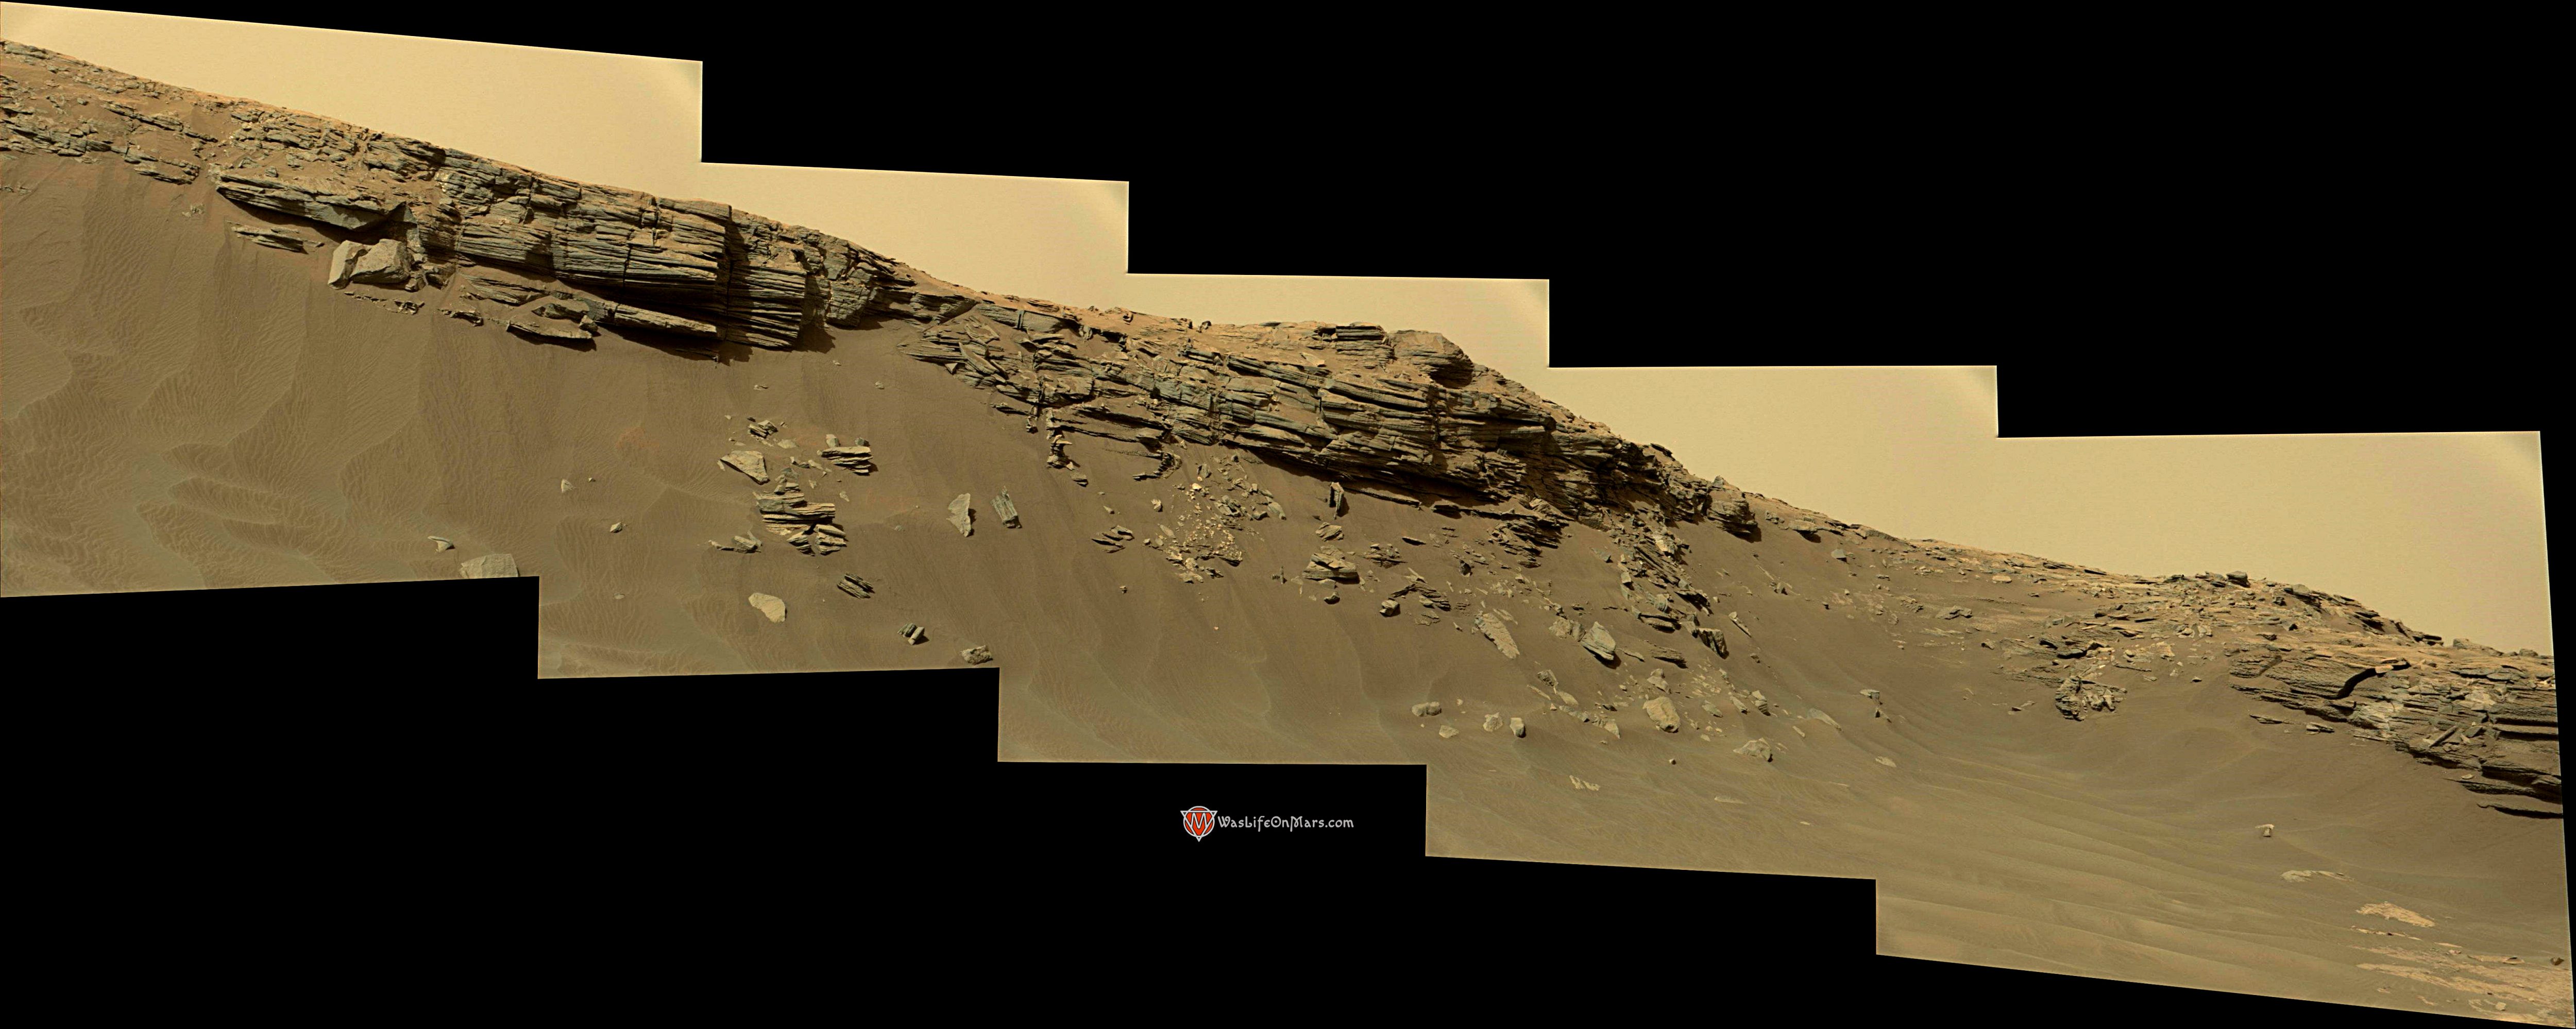 panoramic curiosity rover view 2e - sol 1381 - was life on mars